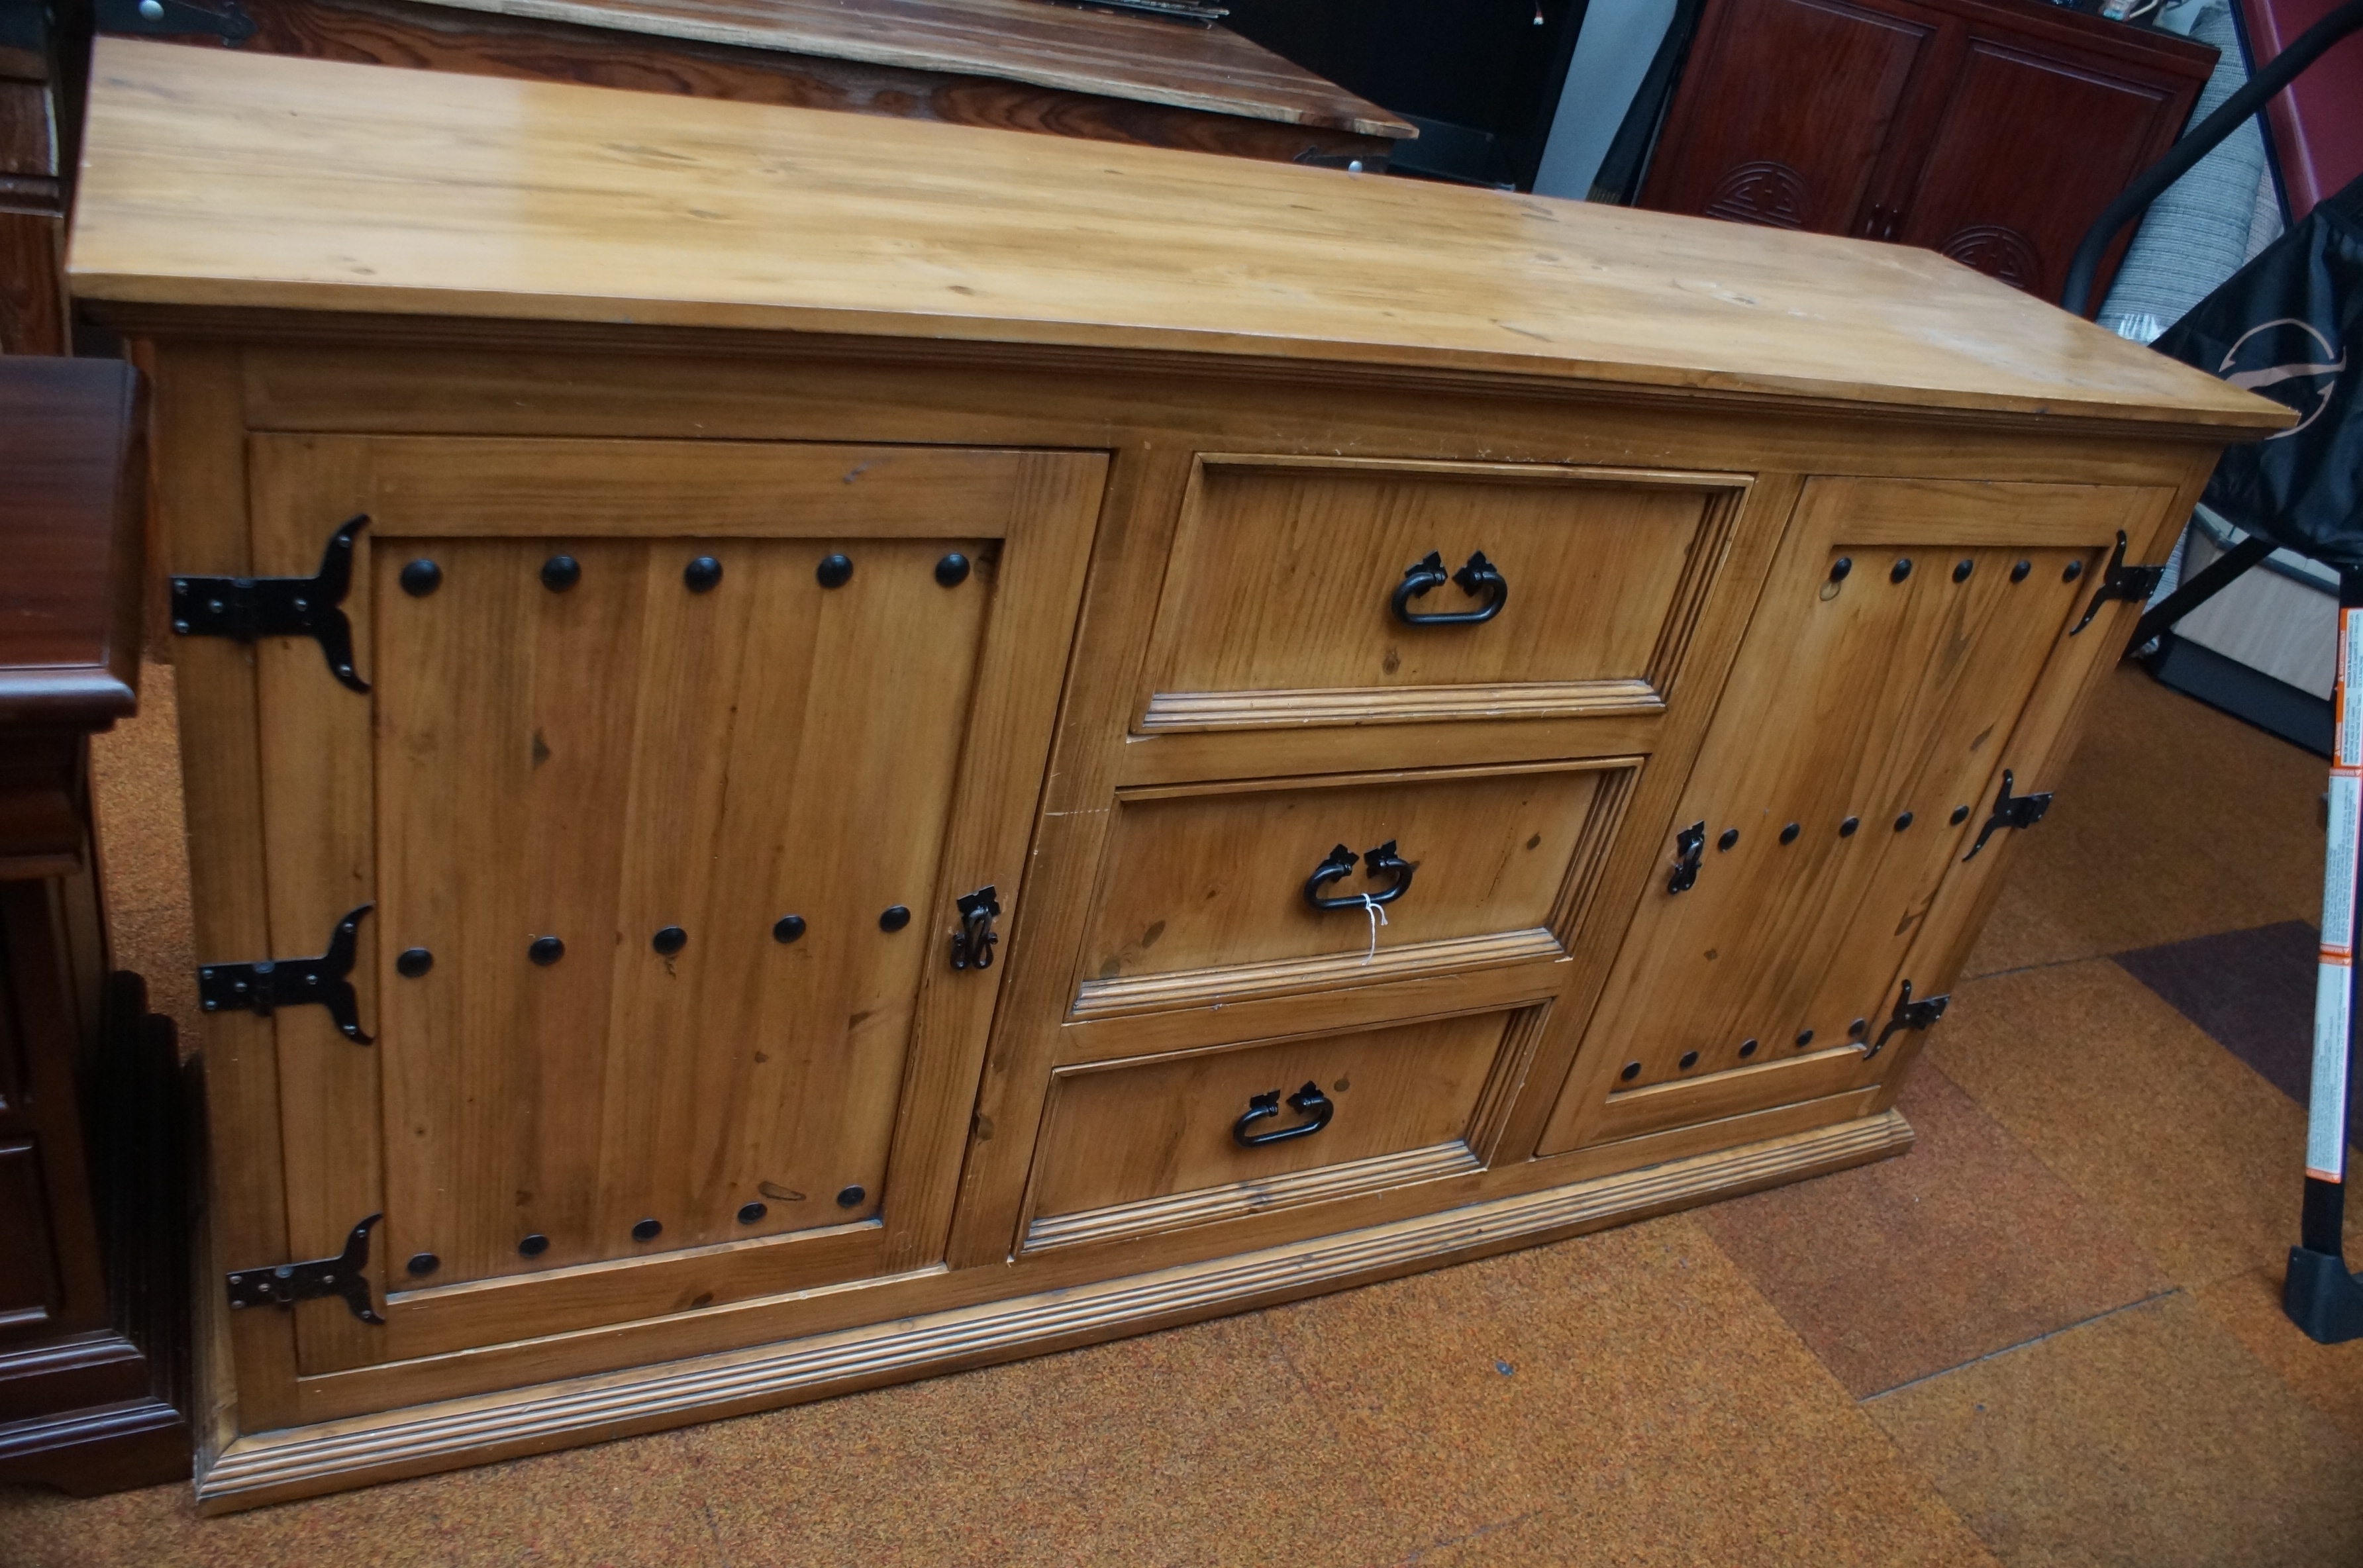 Good quality pine dresser 66 inches